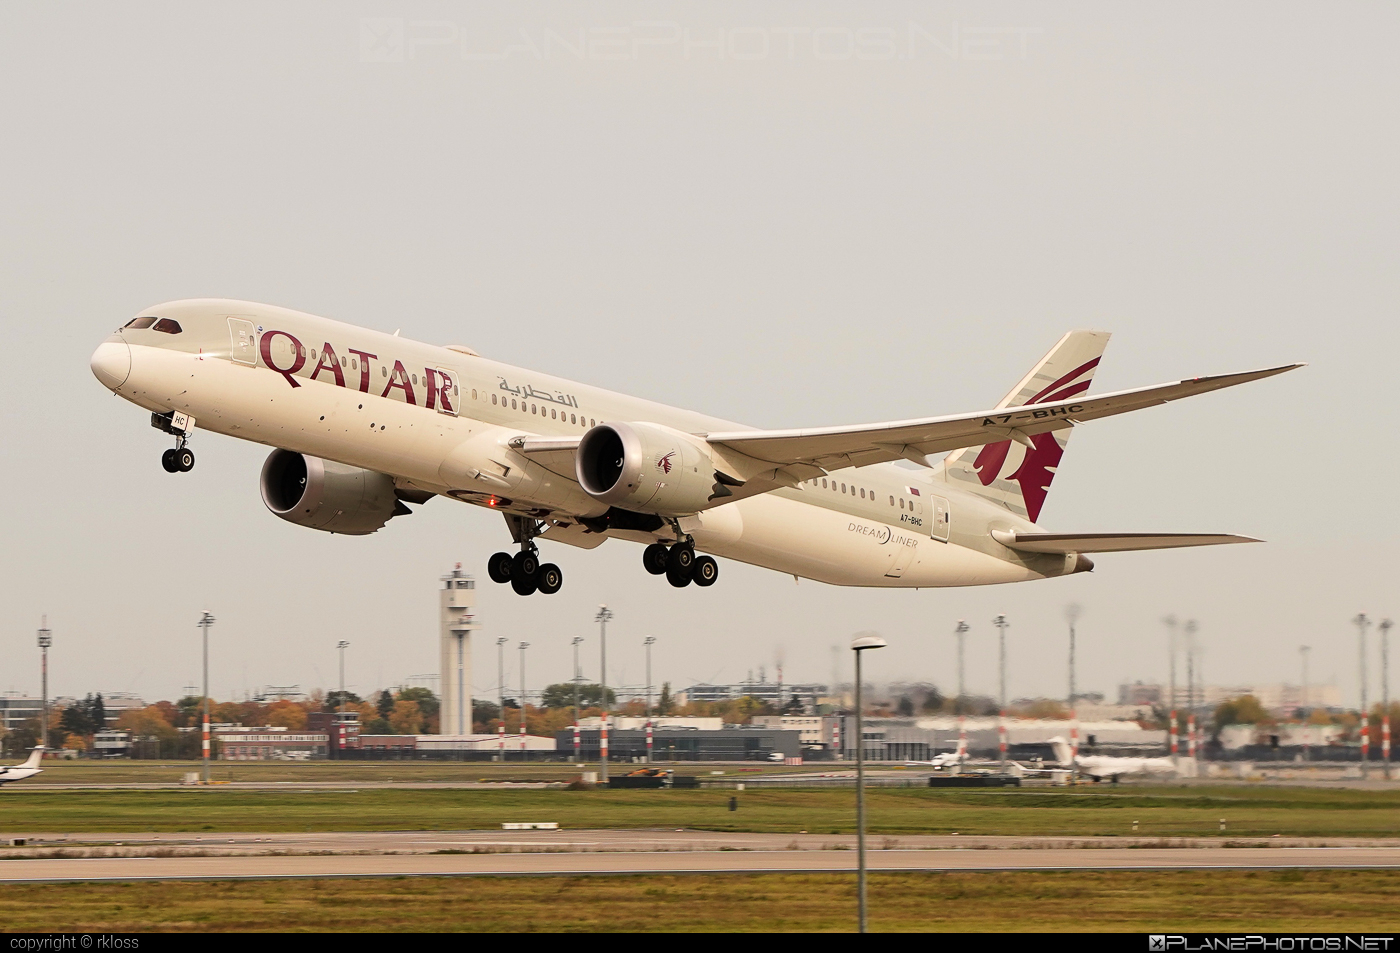 Boeing 787-9 Dreamliner - A7-BHC operated by Qatar Airways #b787 #boeing #boeing787 #dreamliner #qatarairways